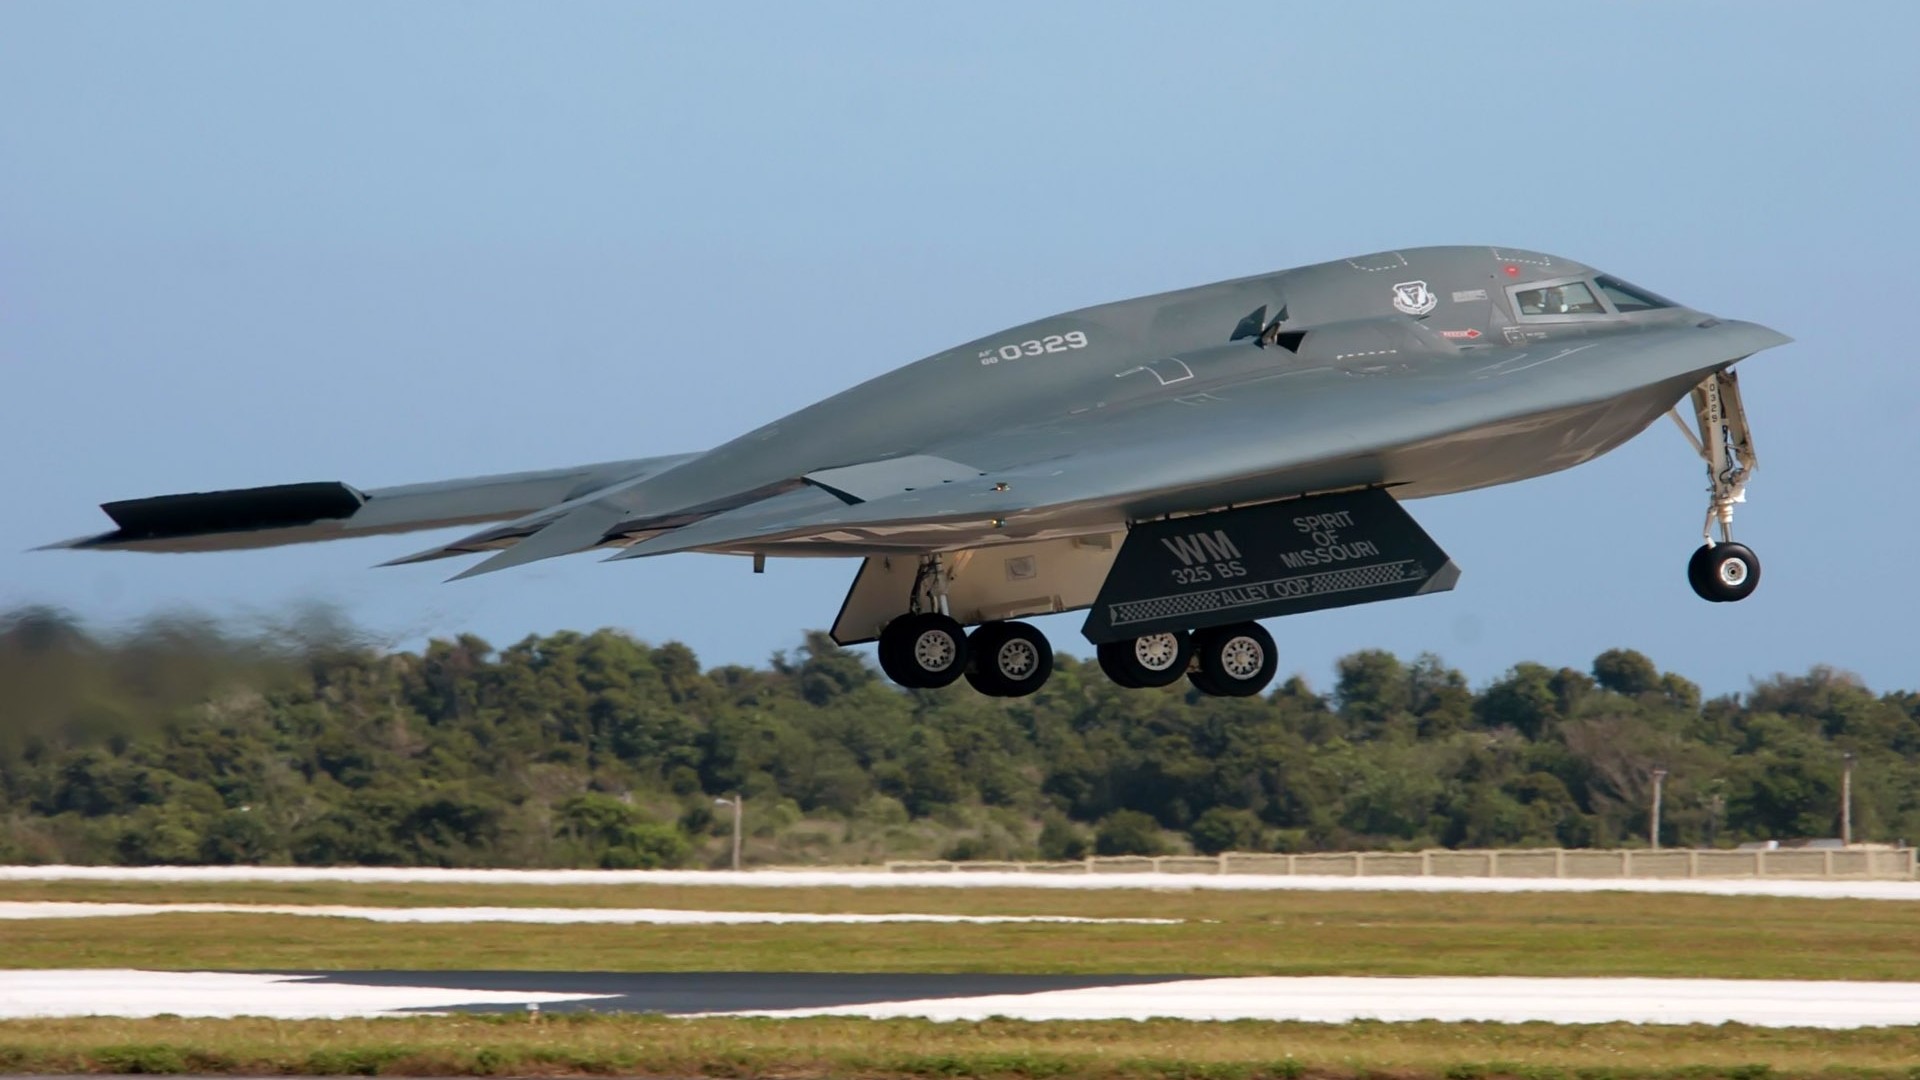 General 1920x1080 military aircraft airplane Northrop Grumman B-2 Spirit Spirit military aircraft vehicle numbers strategic bomber American aircraft Northrop Grumman take-off military vehicle